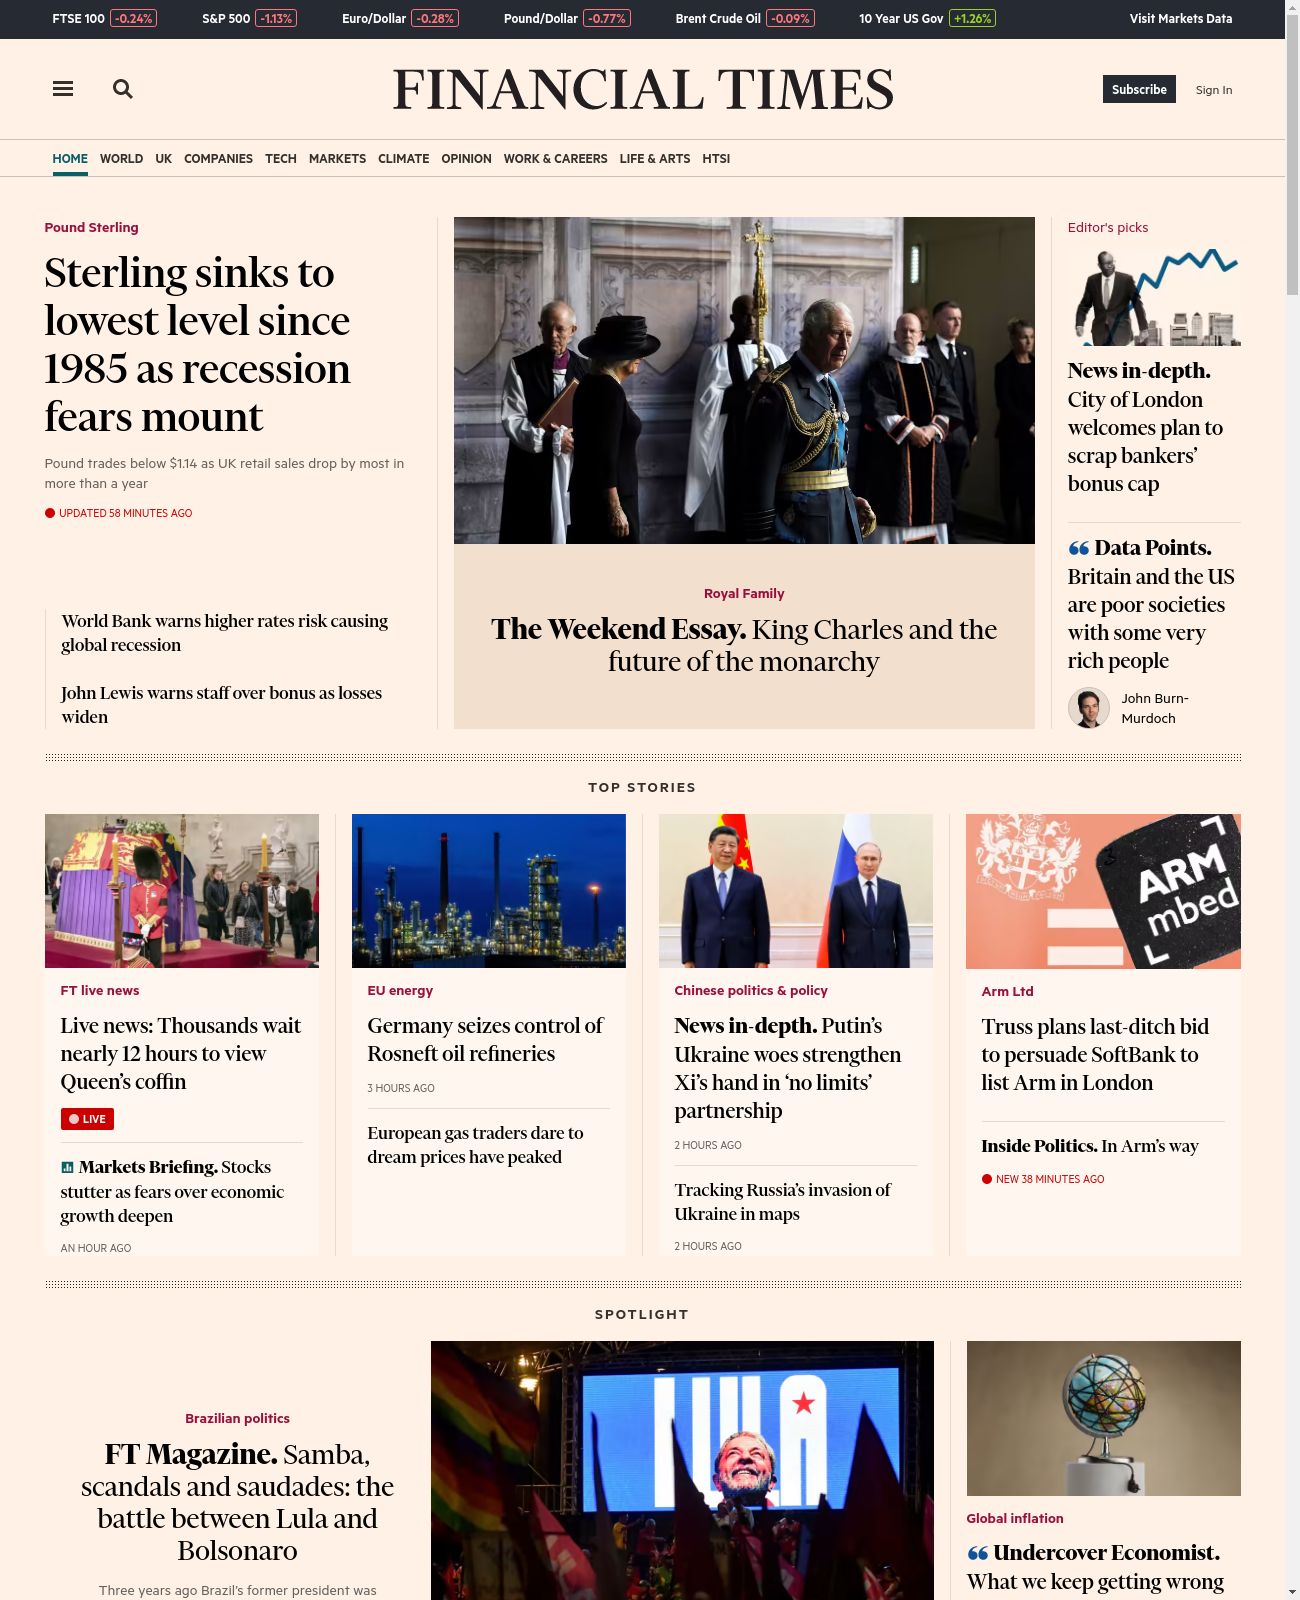 Financial Times at 2022-09-16 10:16:38+01:00 local time